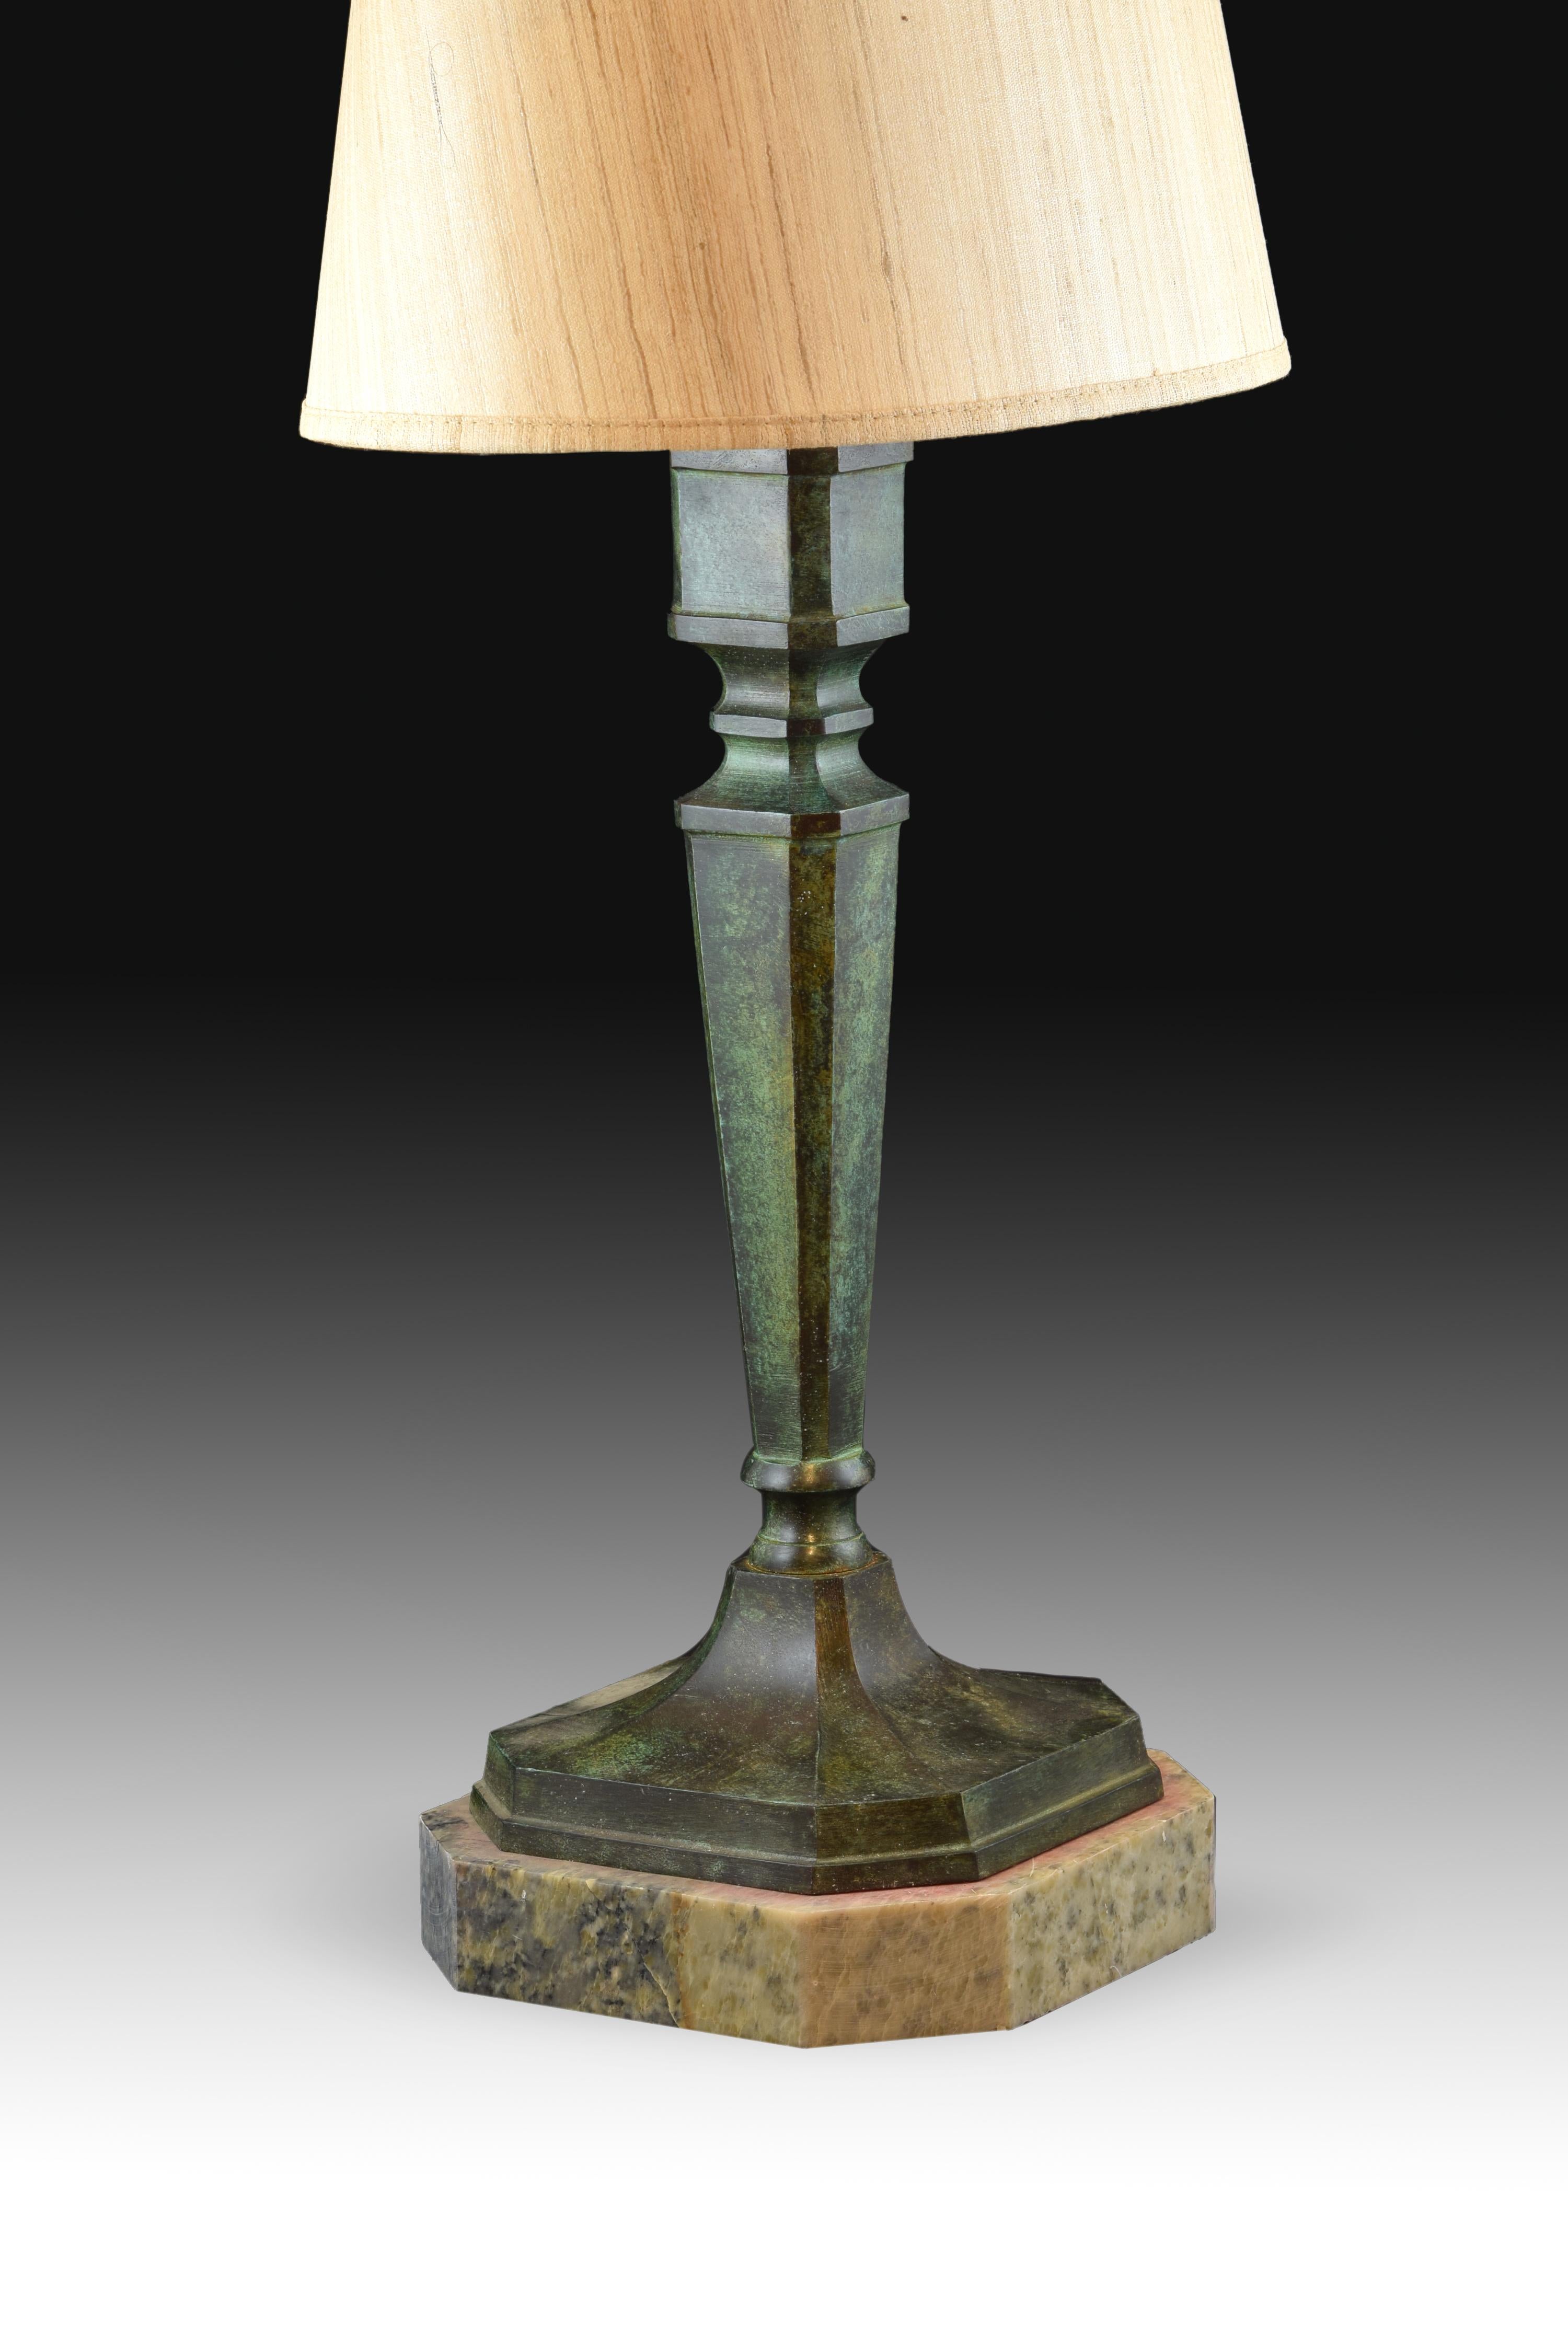 European Estipite Shaped Lamp with Green Patina, No Shade Included, Bronze, Marble